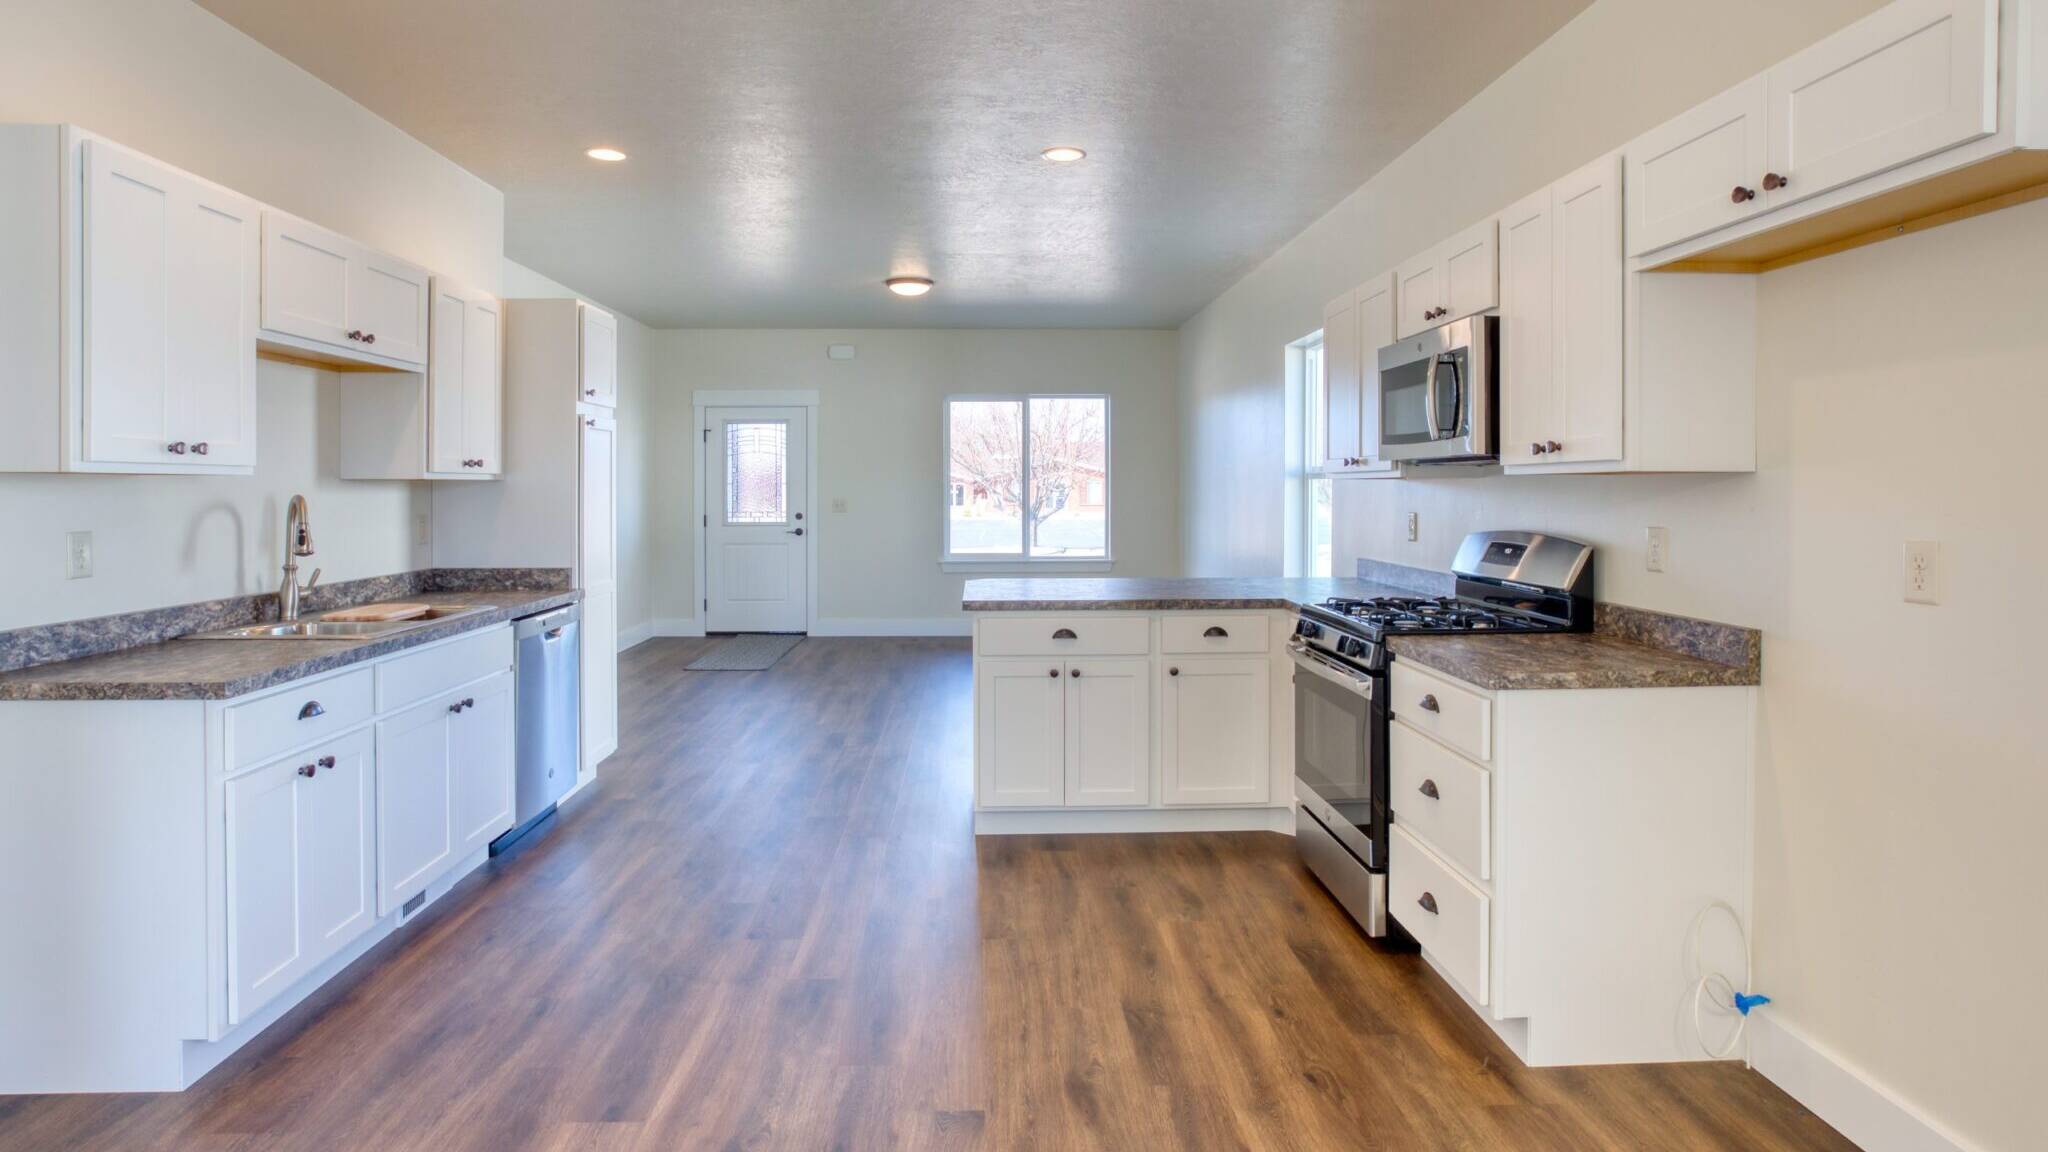 Kitchen in the Mill Creek model home - built by Big Sky Builders in Corvallis, MT